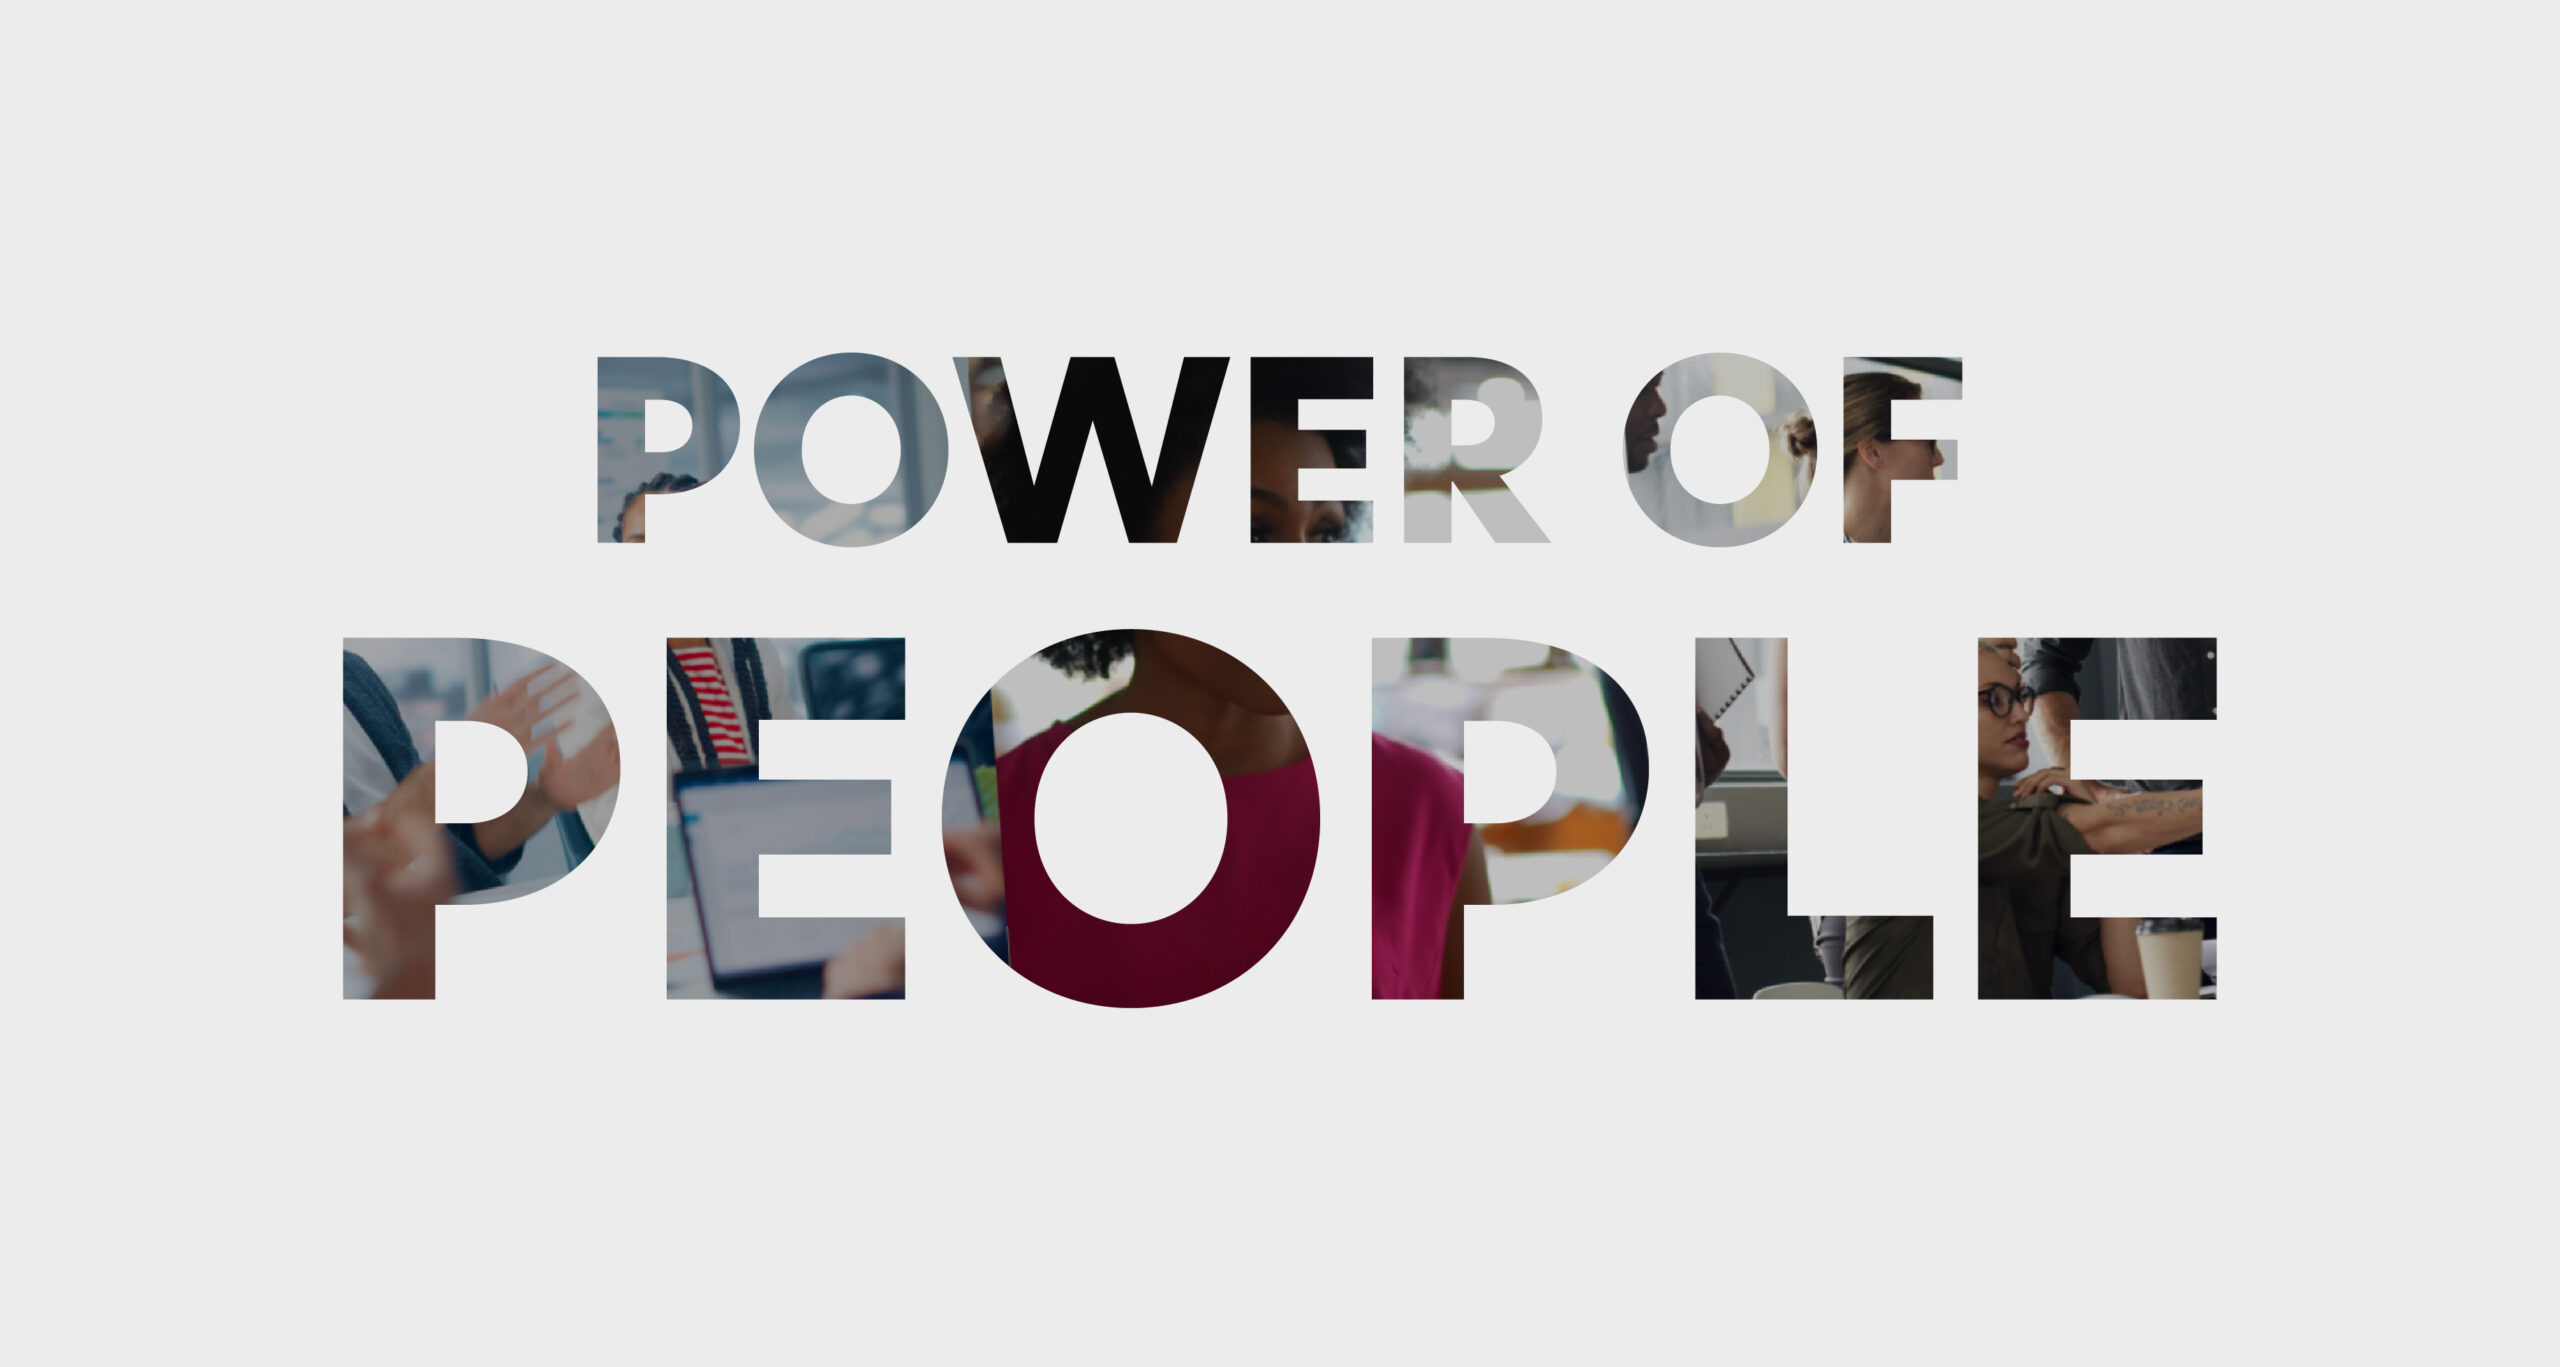 Video of people playing in Power of People text